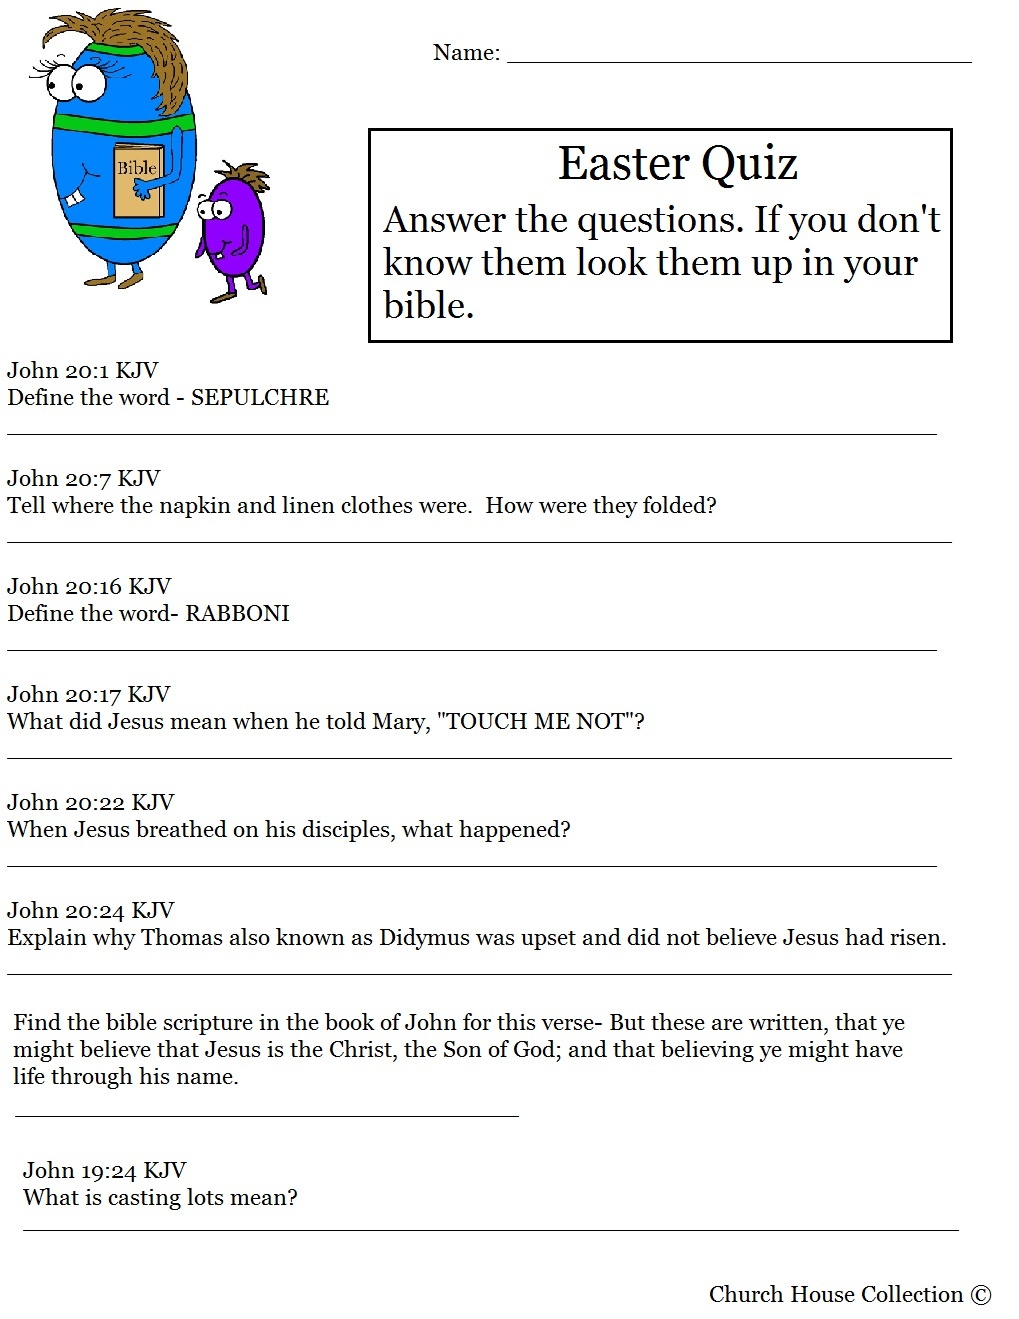 Hard Easter Quiz On Resurrection Of Jesus - Free Printable Bible Trivia Questions And Answers